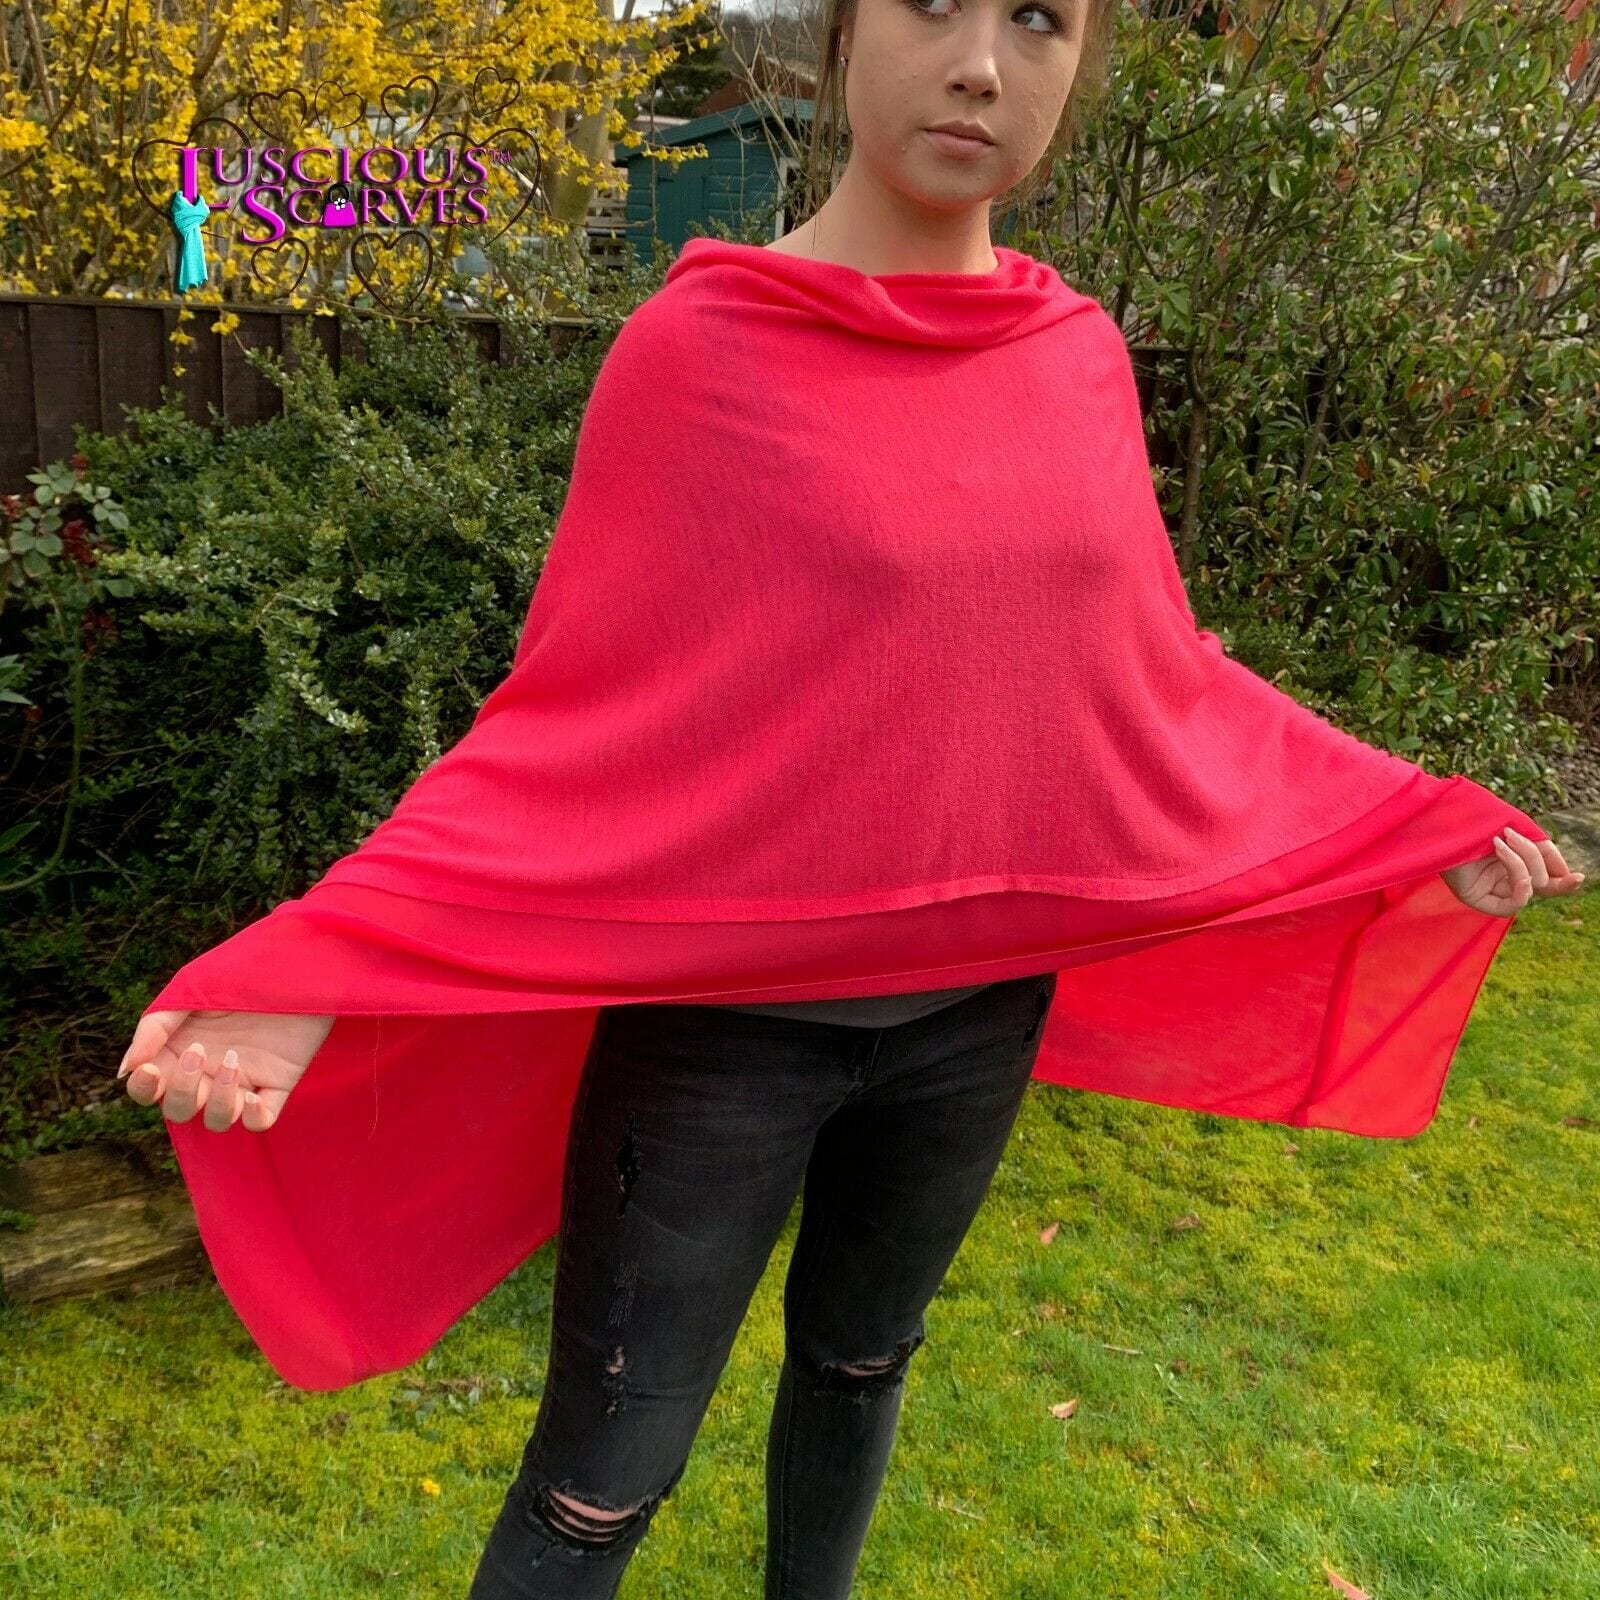 lusciousscarves Poncho Liners Hot Pink Light Weight Poncho